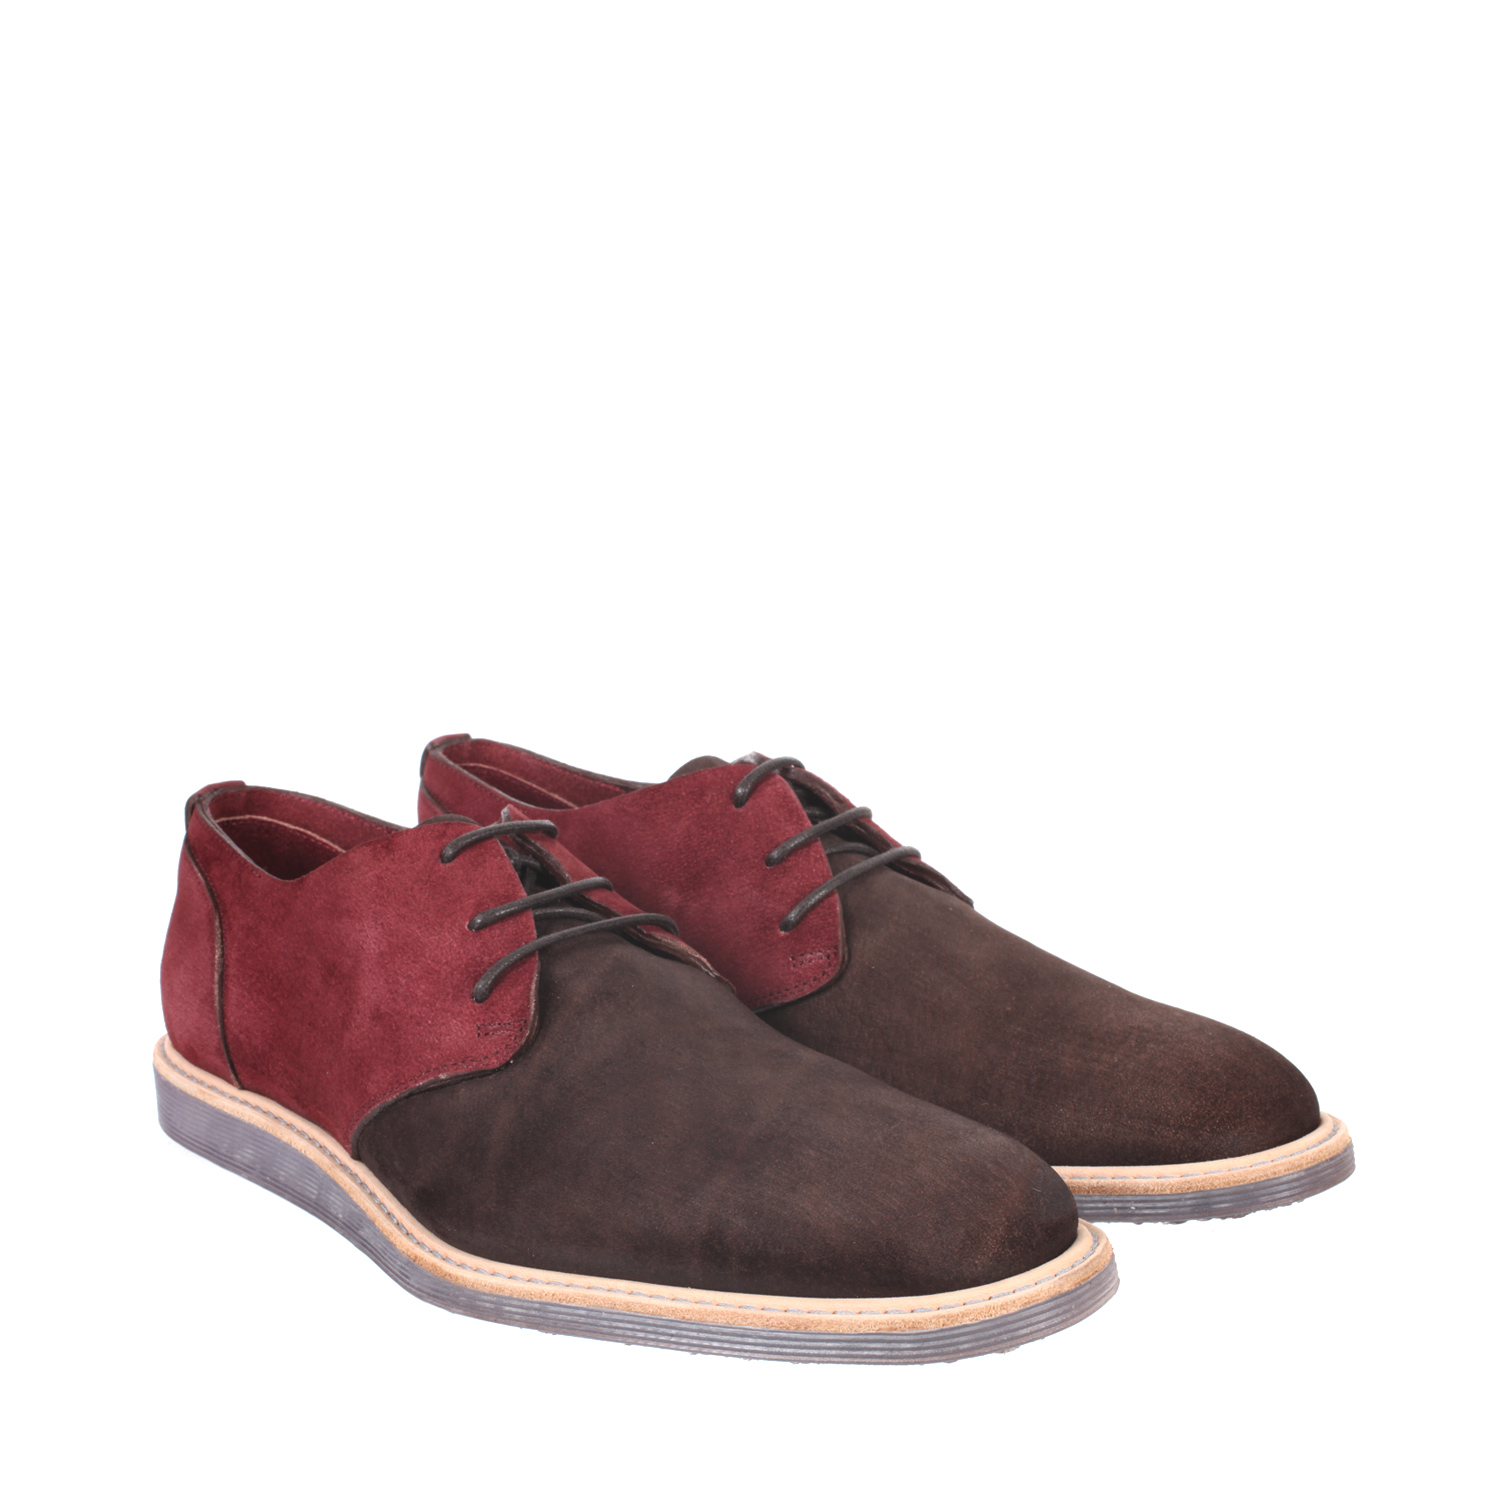 Saint laurent Two-tone Derby Shoes in Brown and Burgundy Suede ...  